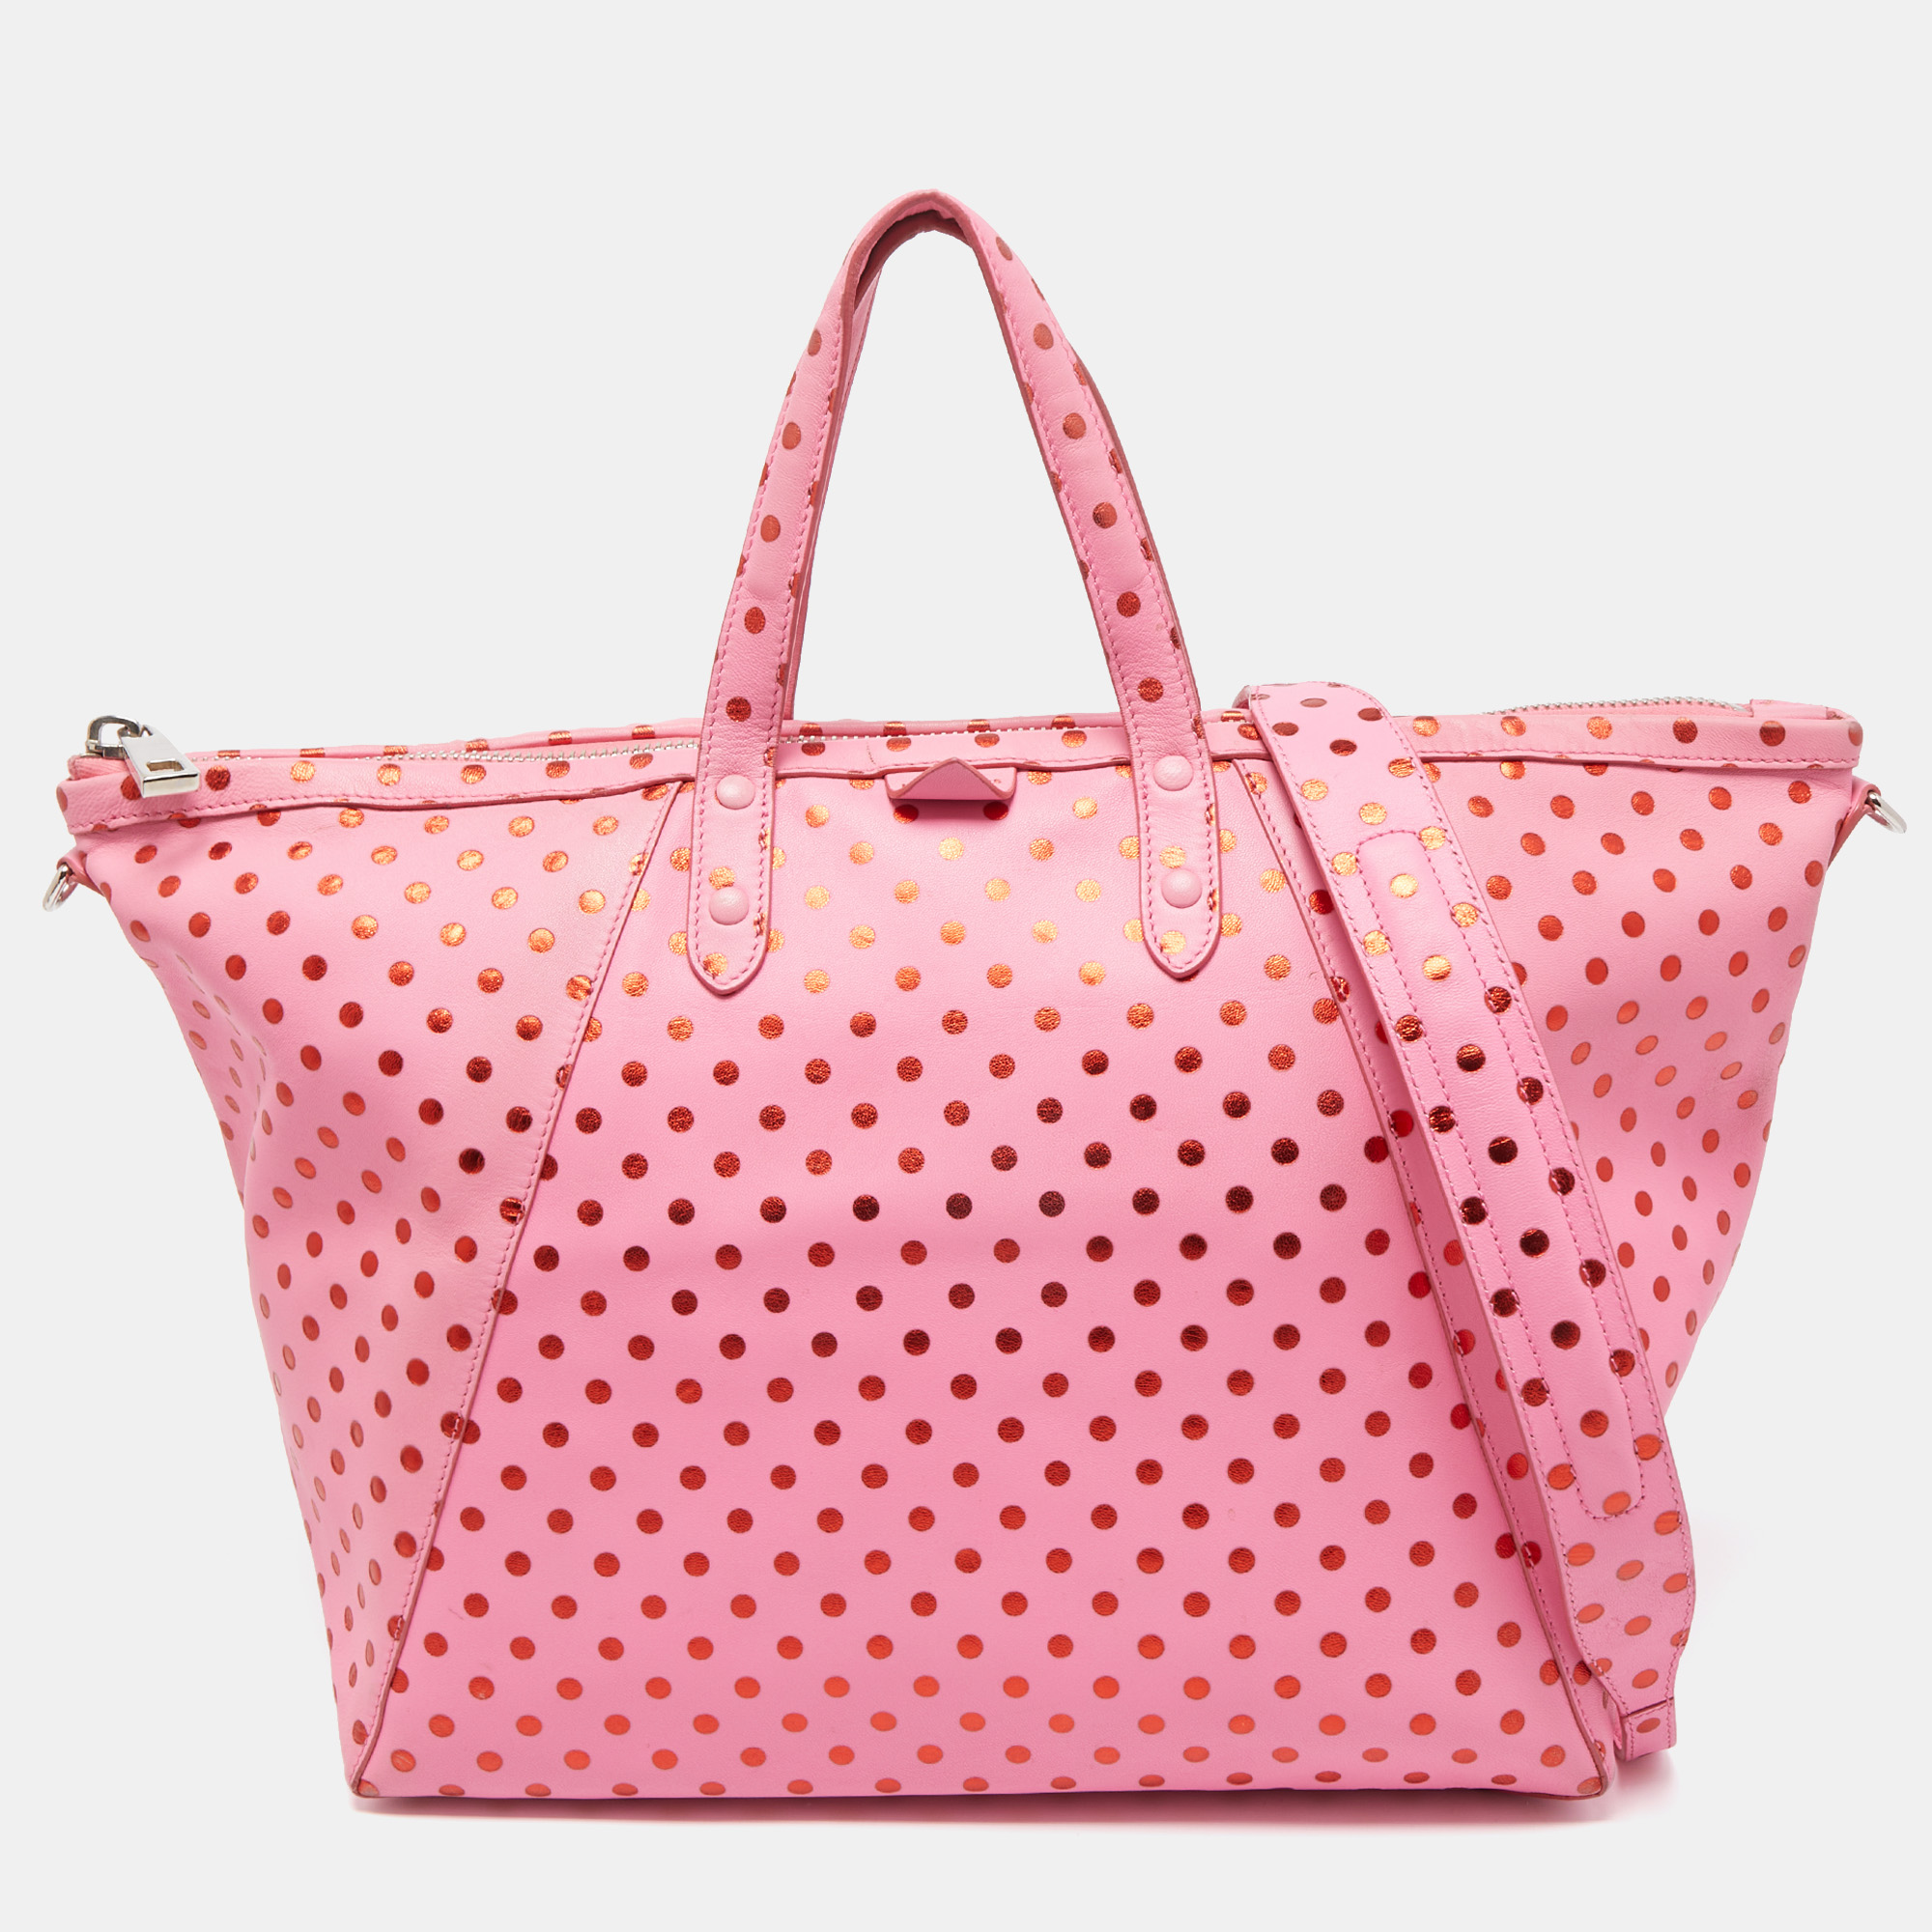 Marc jacobs pink leather polka dot zip tote